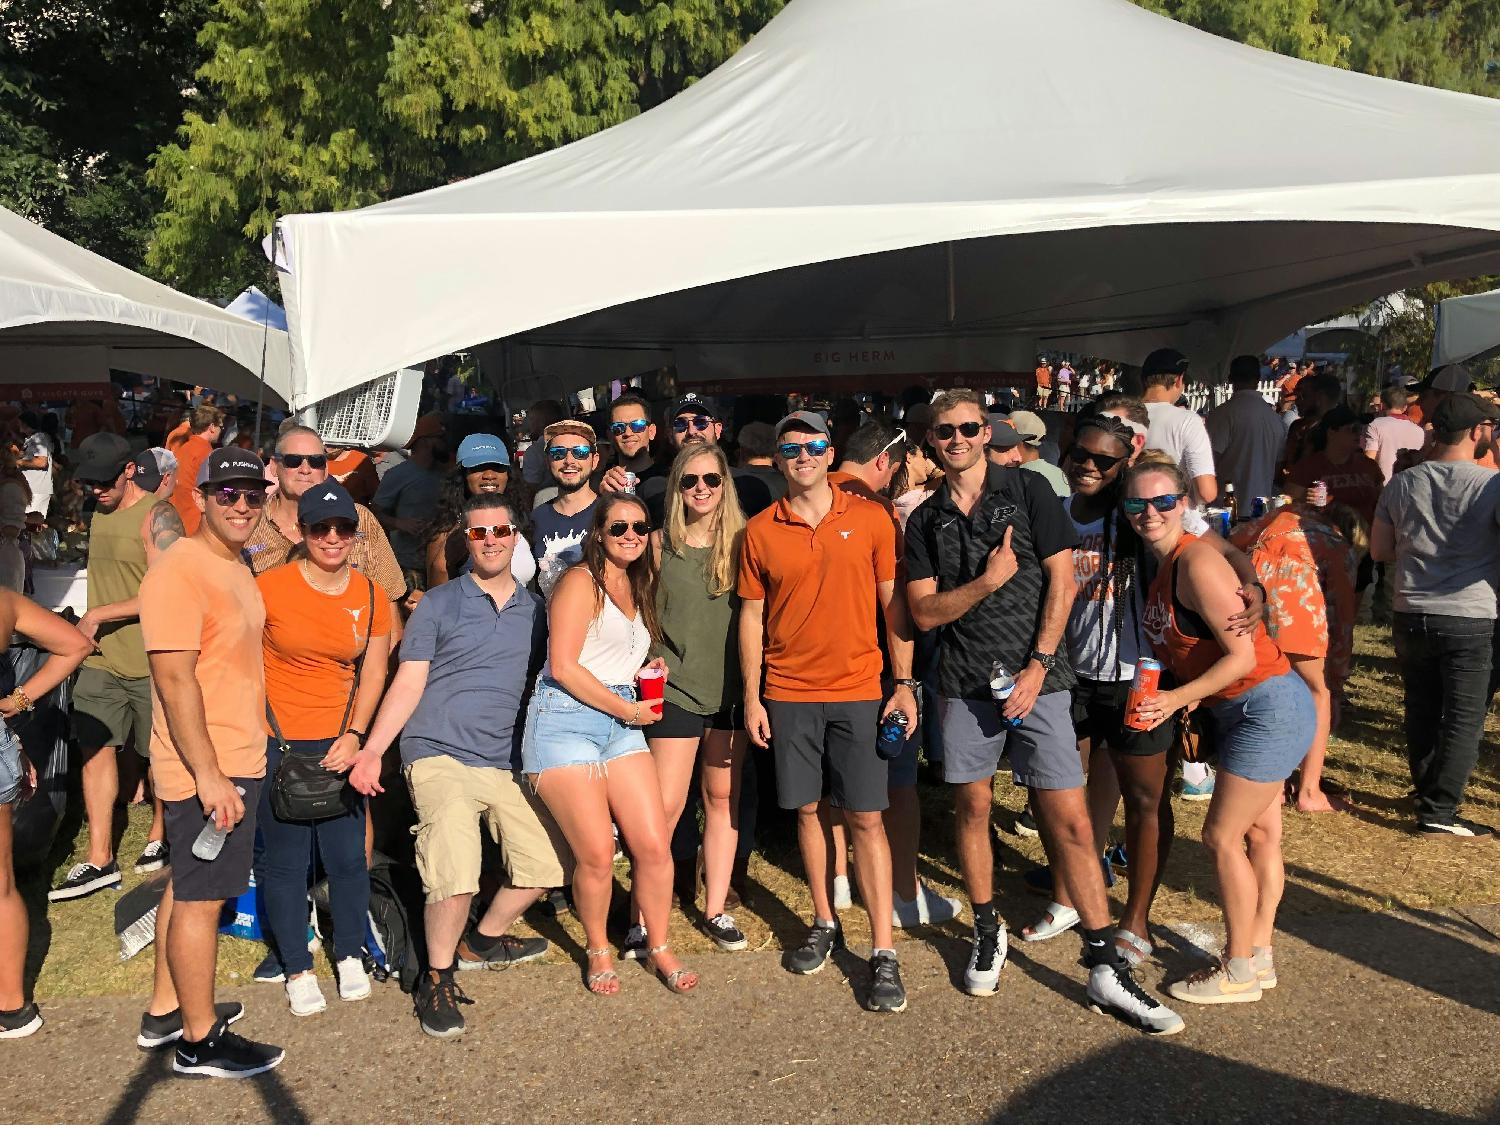 Company tailgate at the local UT Austin game. Hook 'em! 